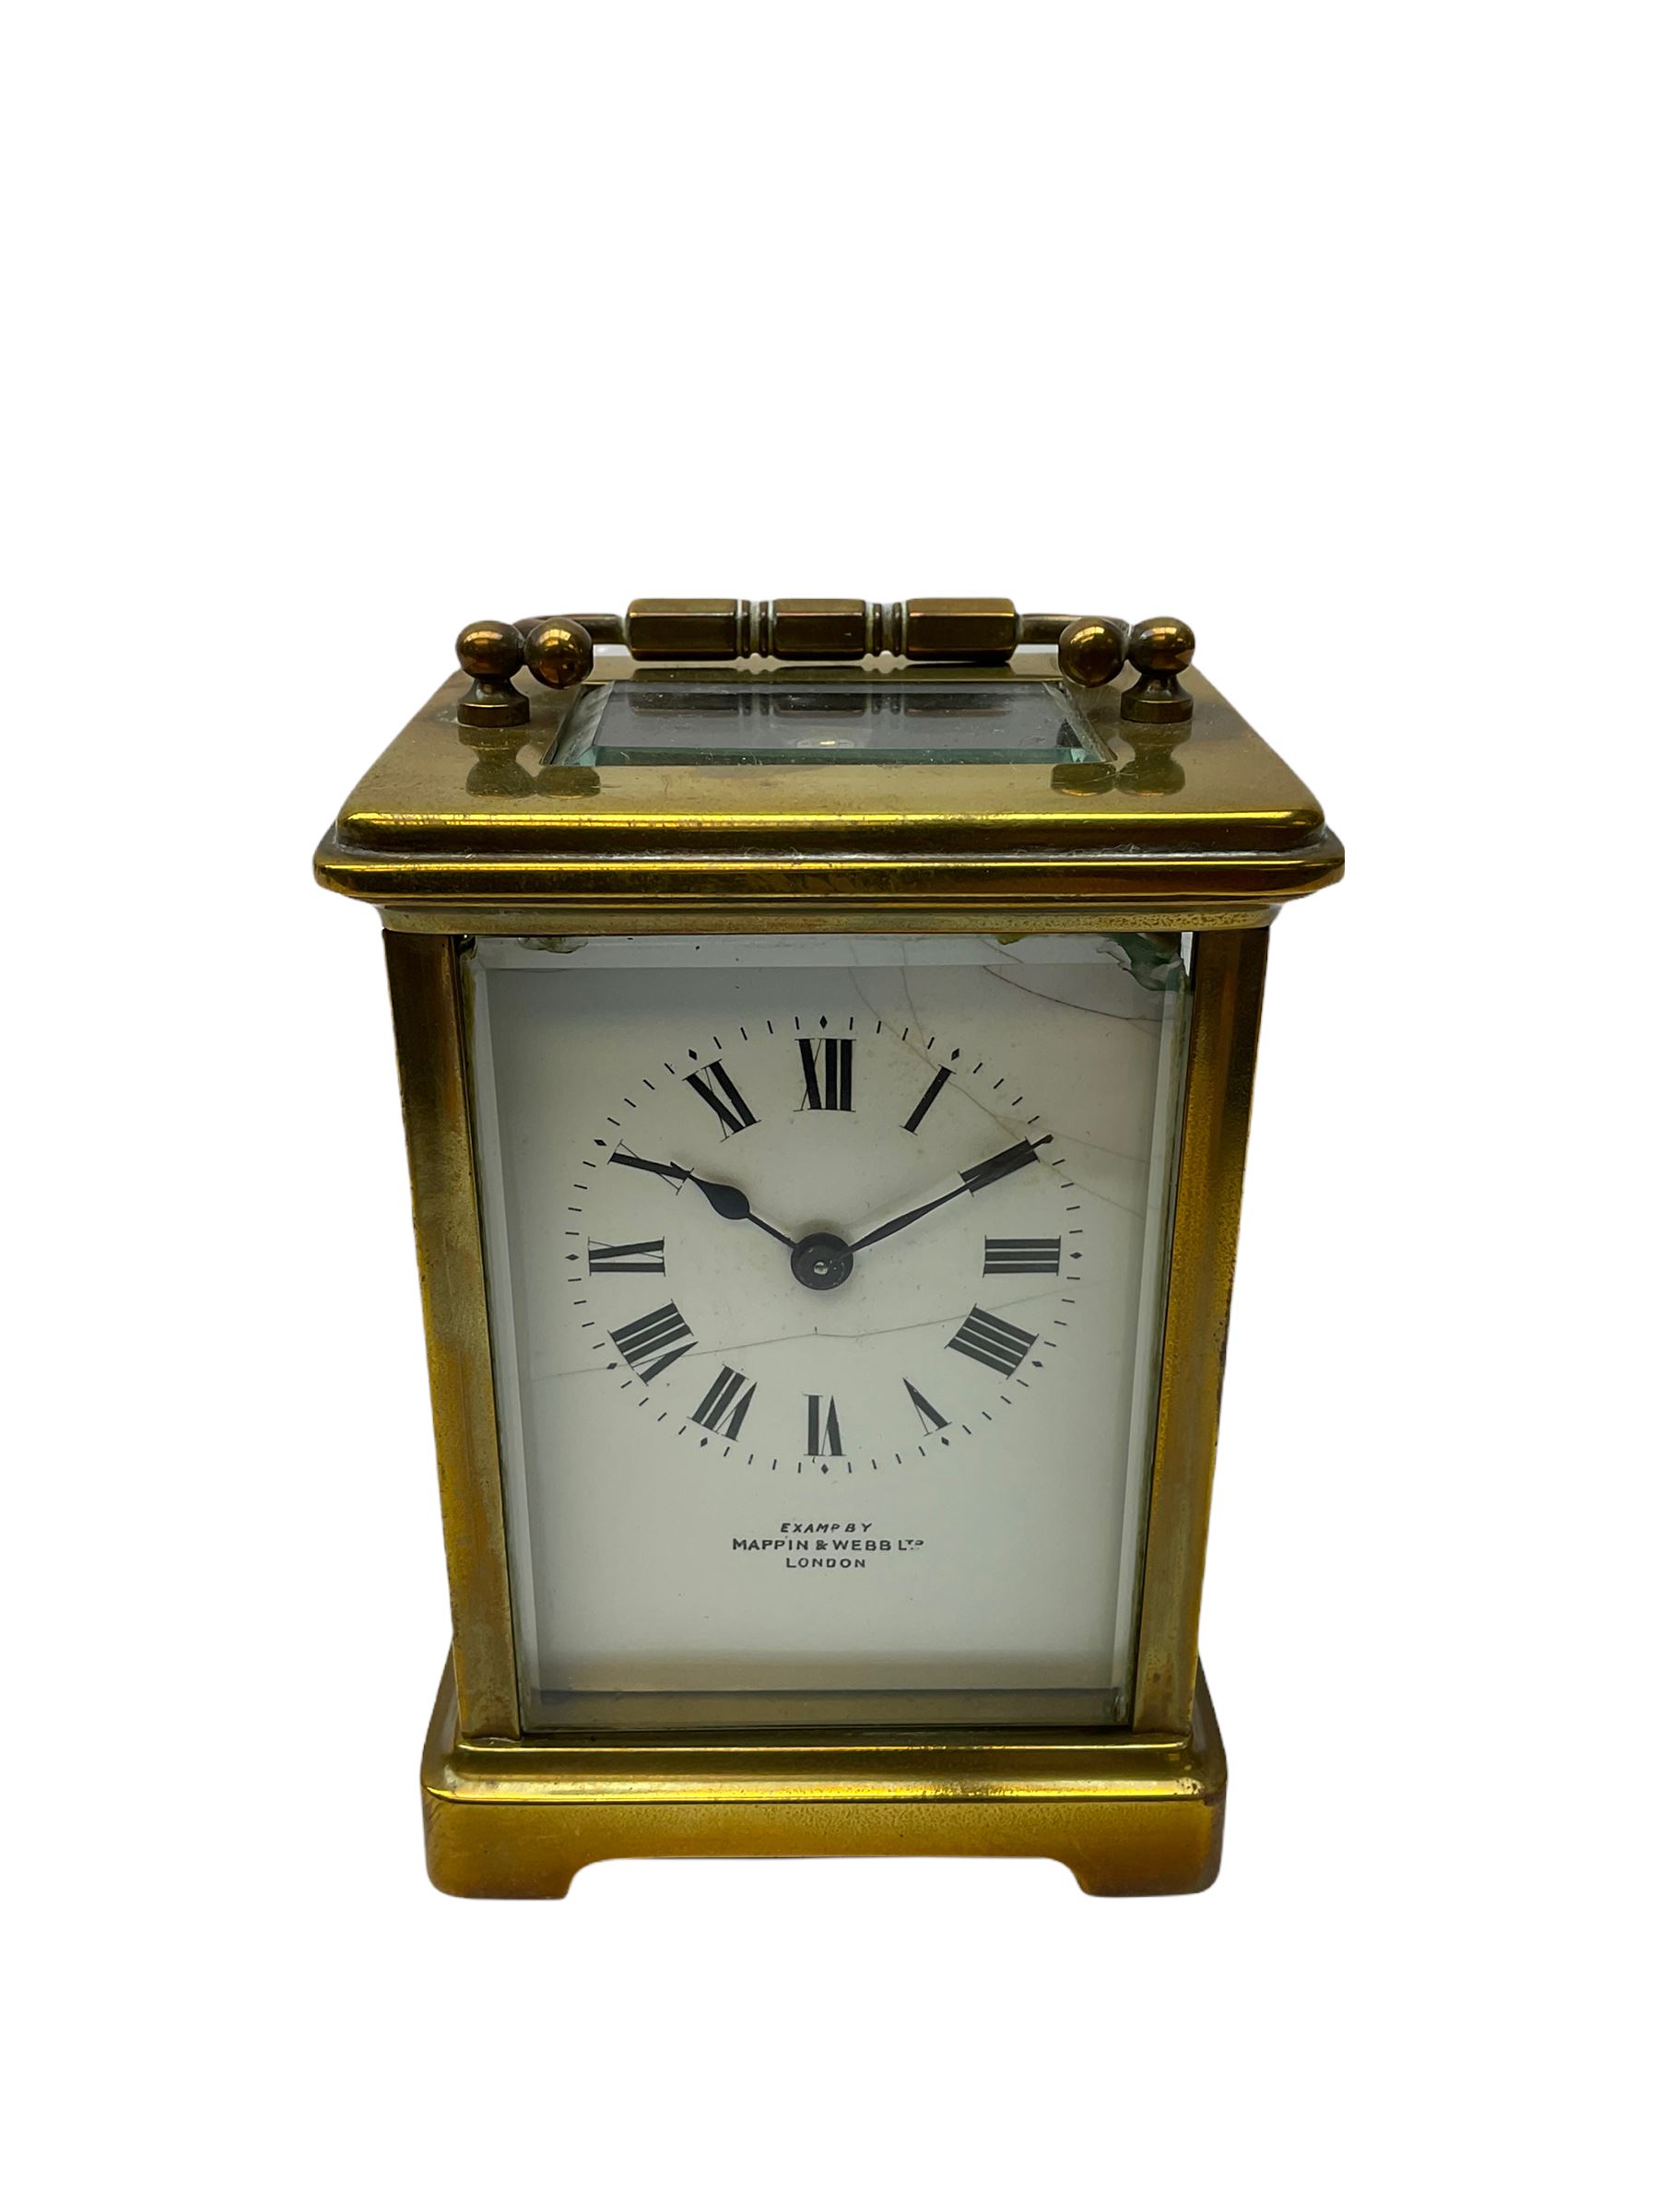 A Corniche cased 20th century timepiece carriage clock retailed by Mappin & Webb